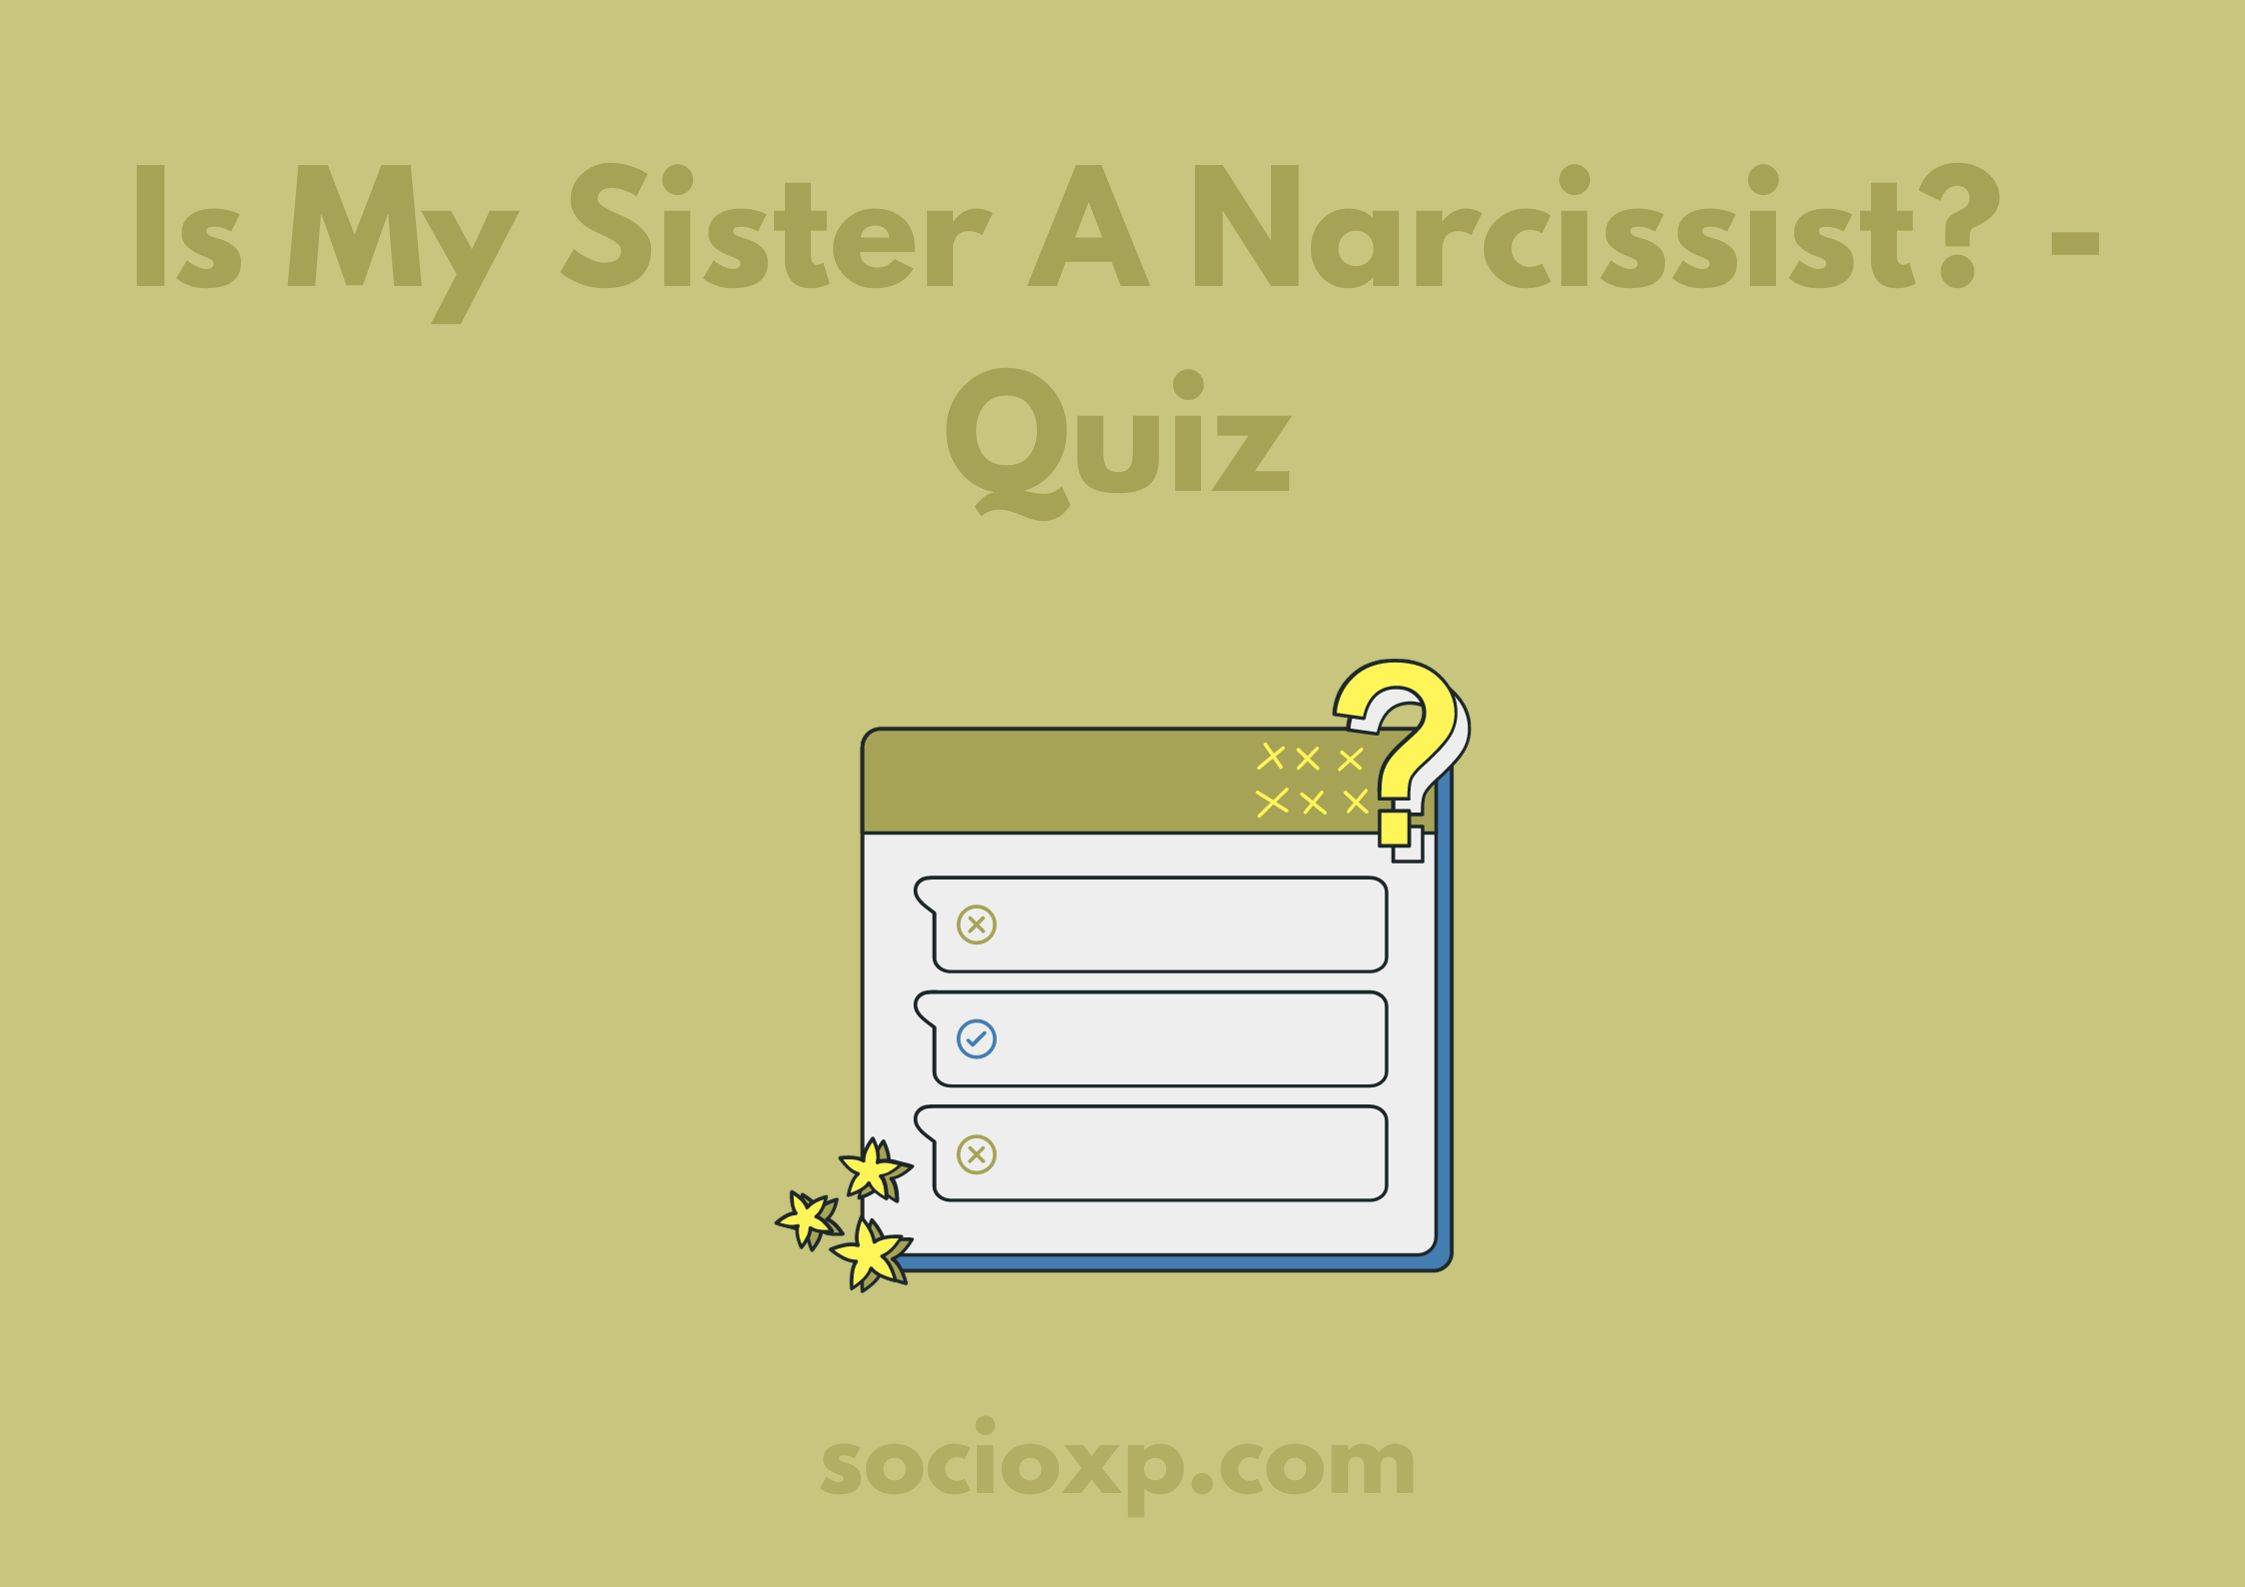 Is My Sister A Narcissist? - Quiz